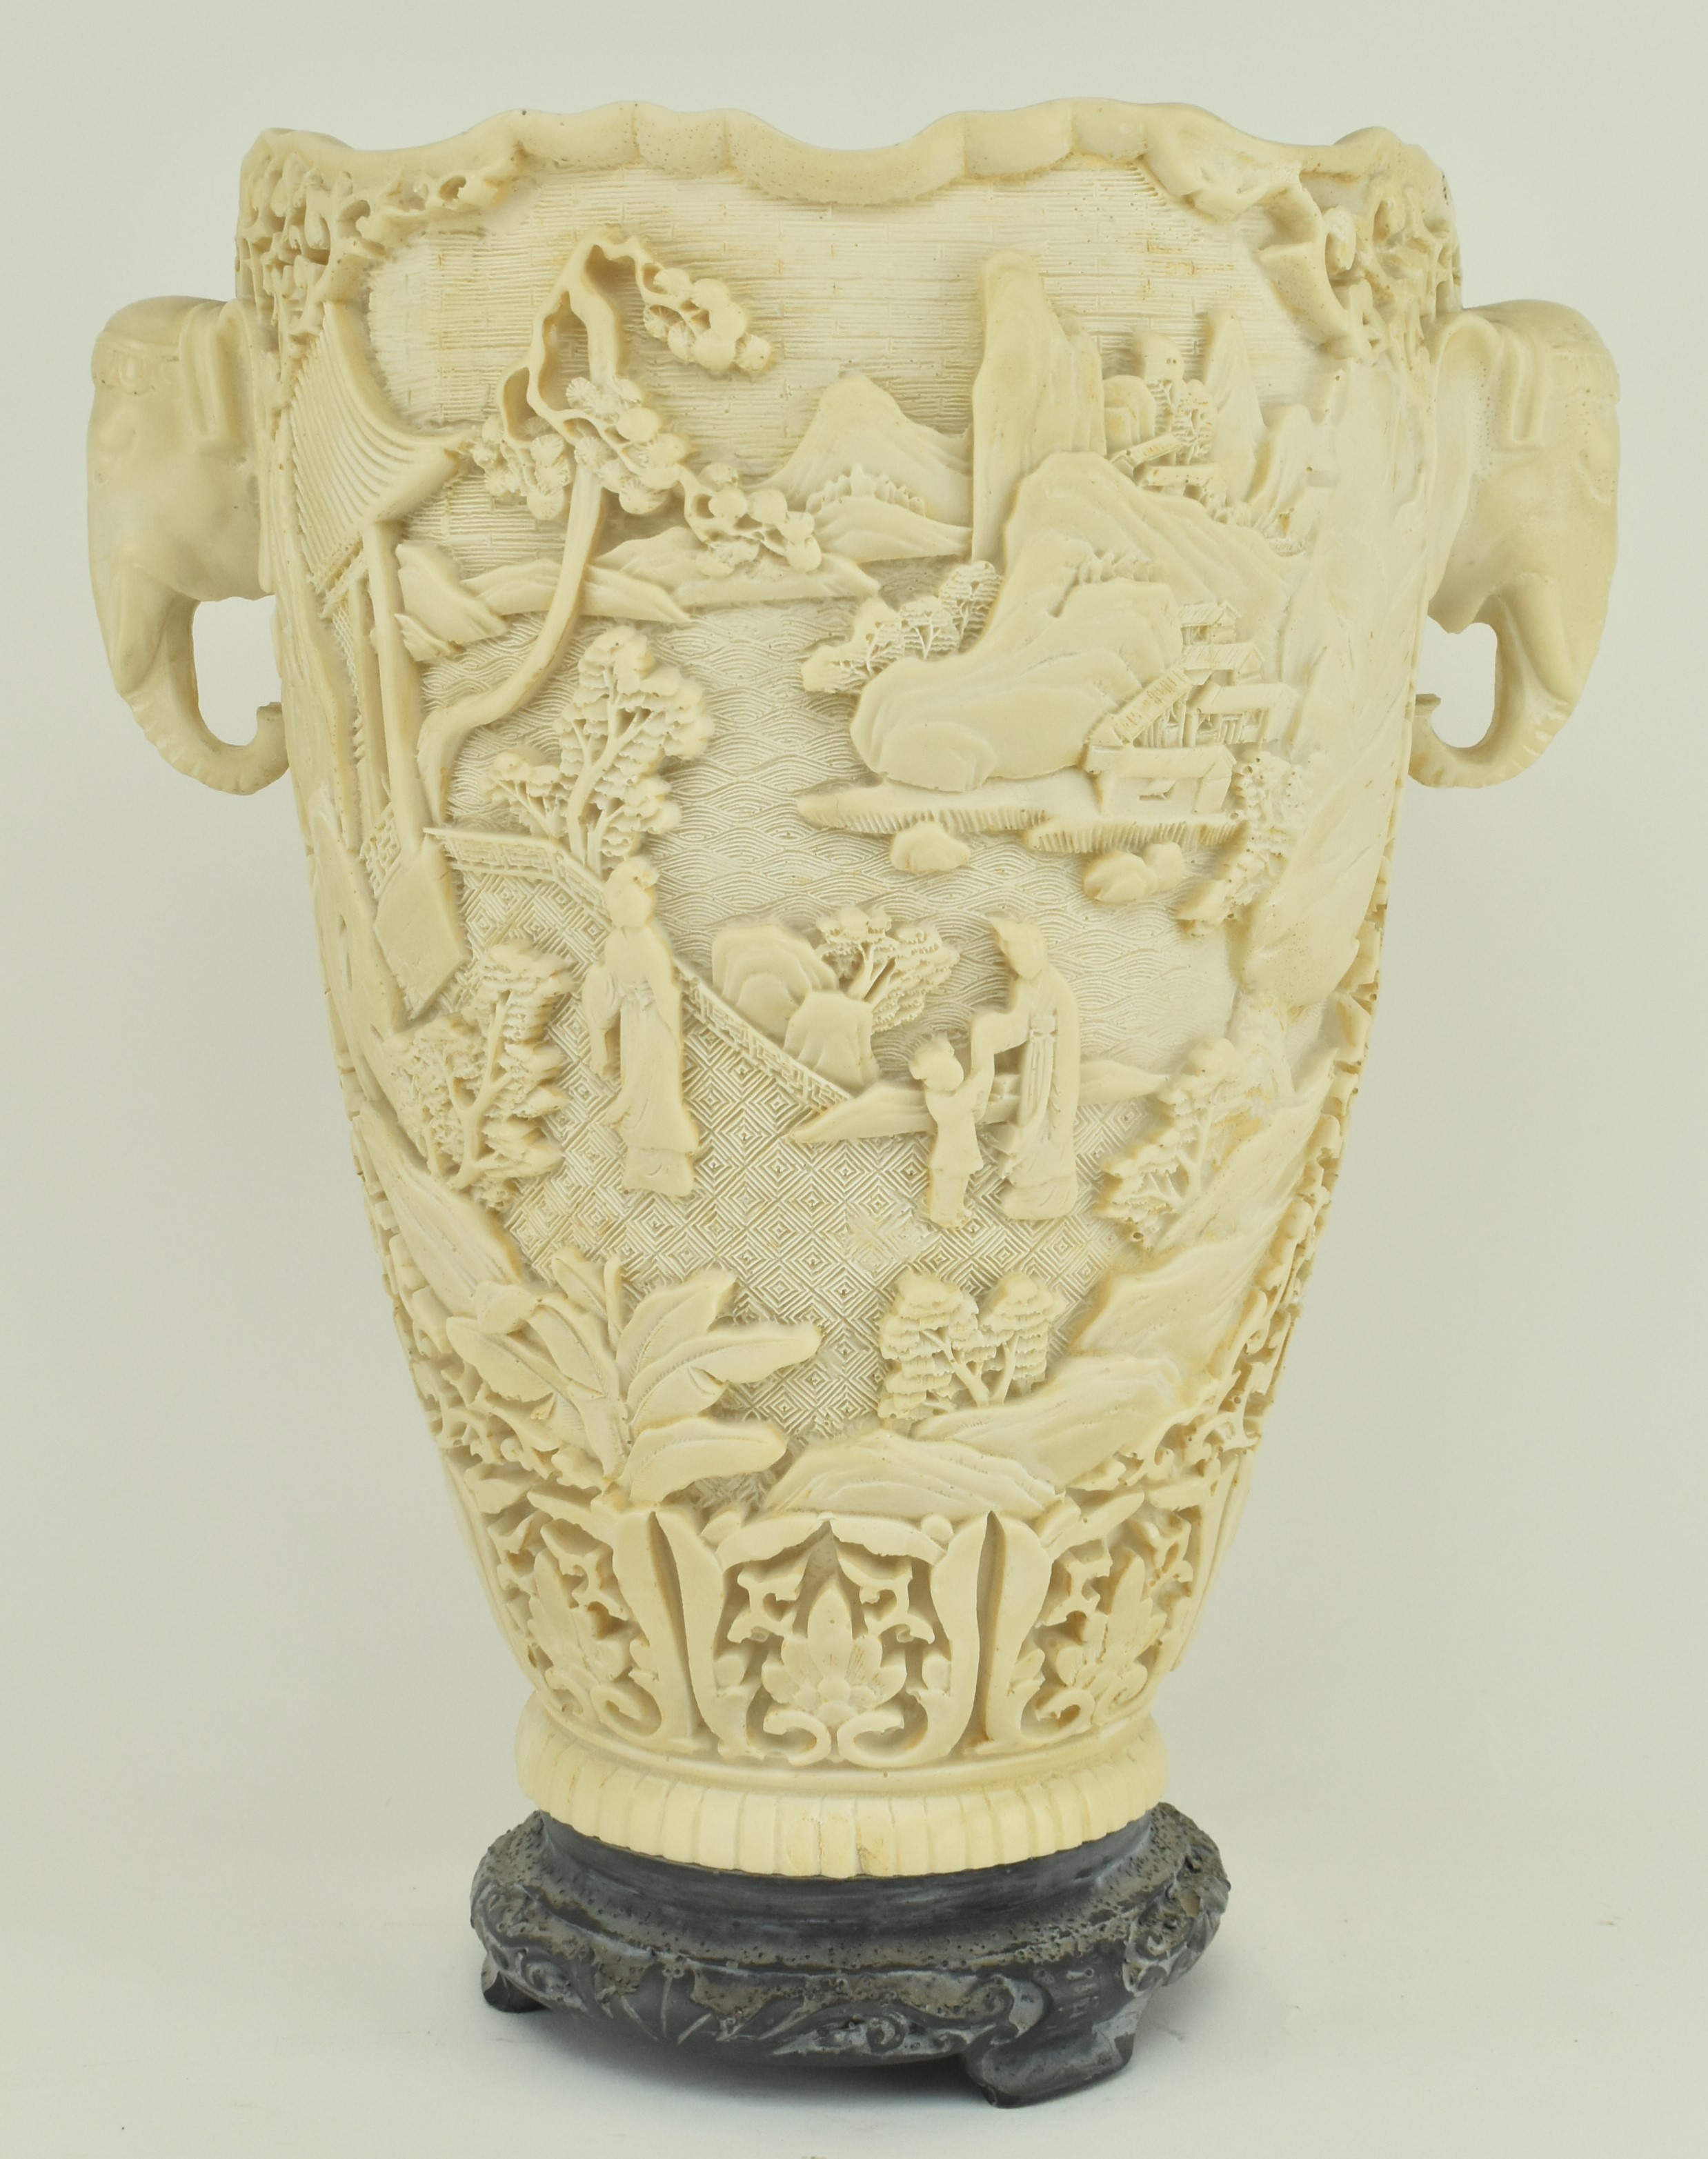 20TH CENTURY CHINESE RESIN CARVED VASE WITH ELEPHANT HANDLES - Image 3 of 7